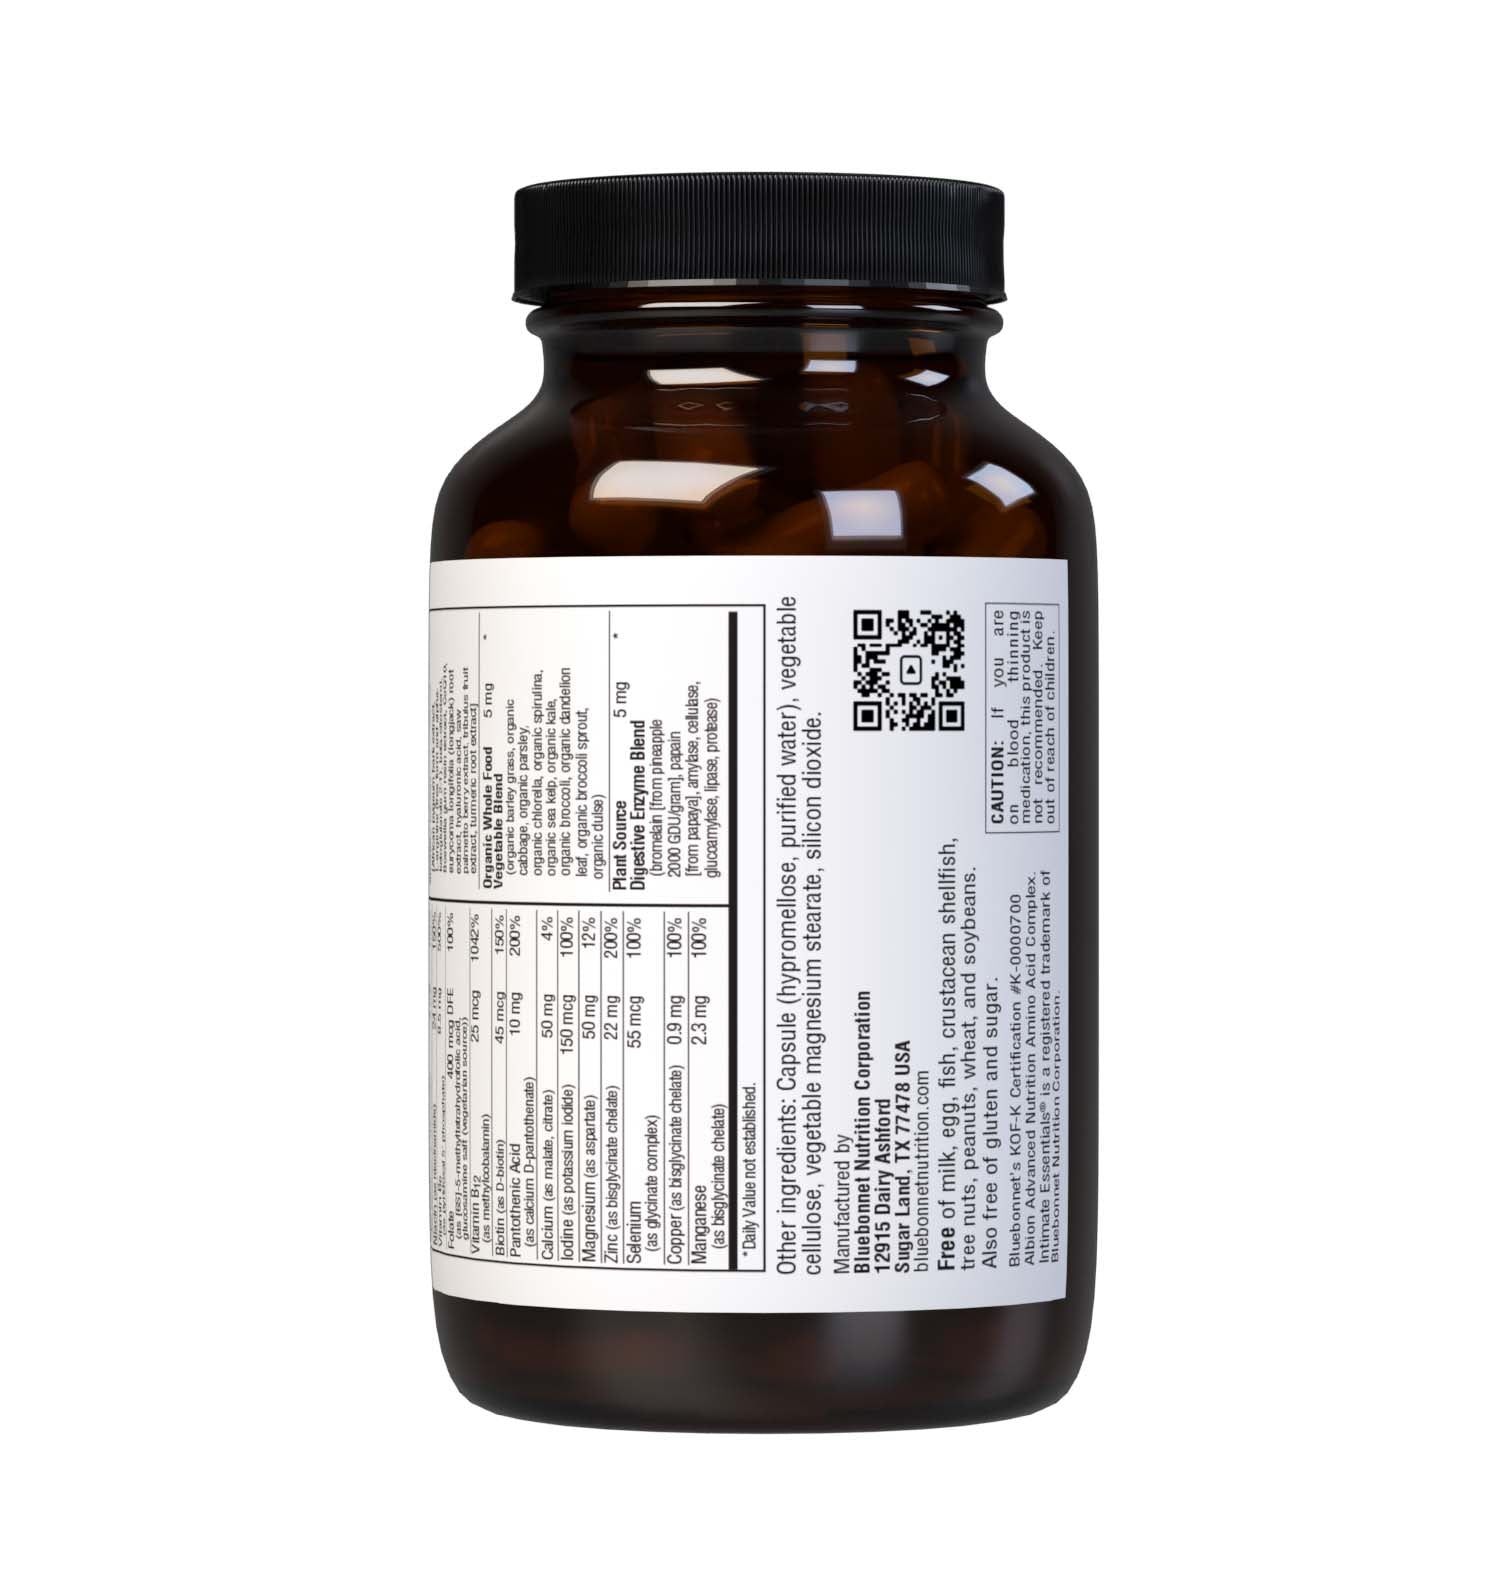 Bluebonnet’s Intimate Essentials Fertility For HIM Whole Food-Based Multiple Vegetable Capsules are specially formulated to help support a man’s fertility by providing the necessary vitamins, minerals and botanicals needed for optimal reproductive health and wellness. Description panel. #size_60 count